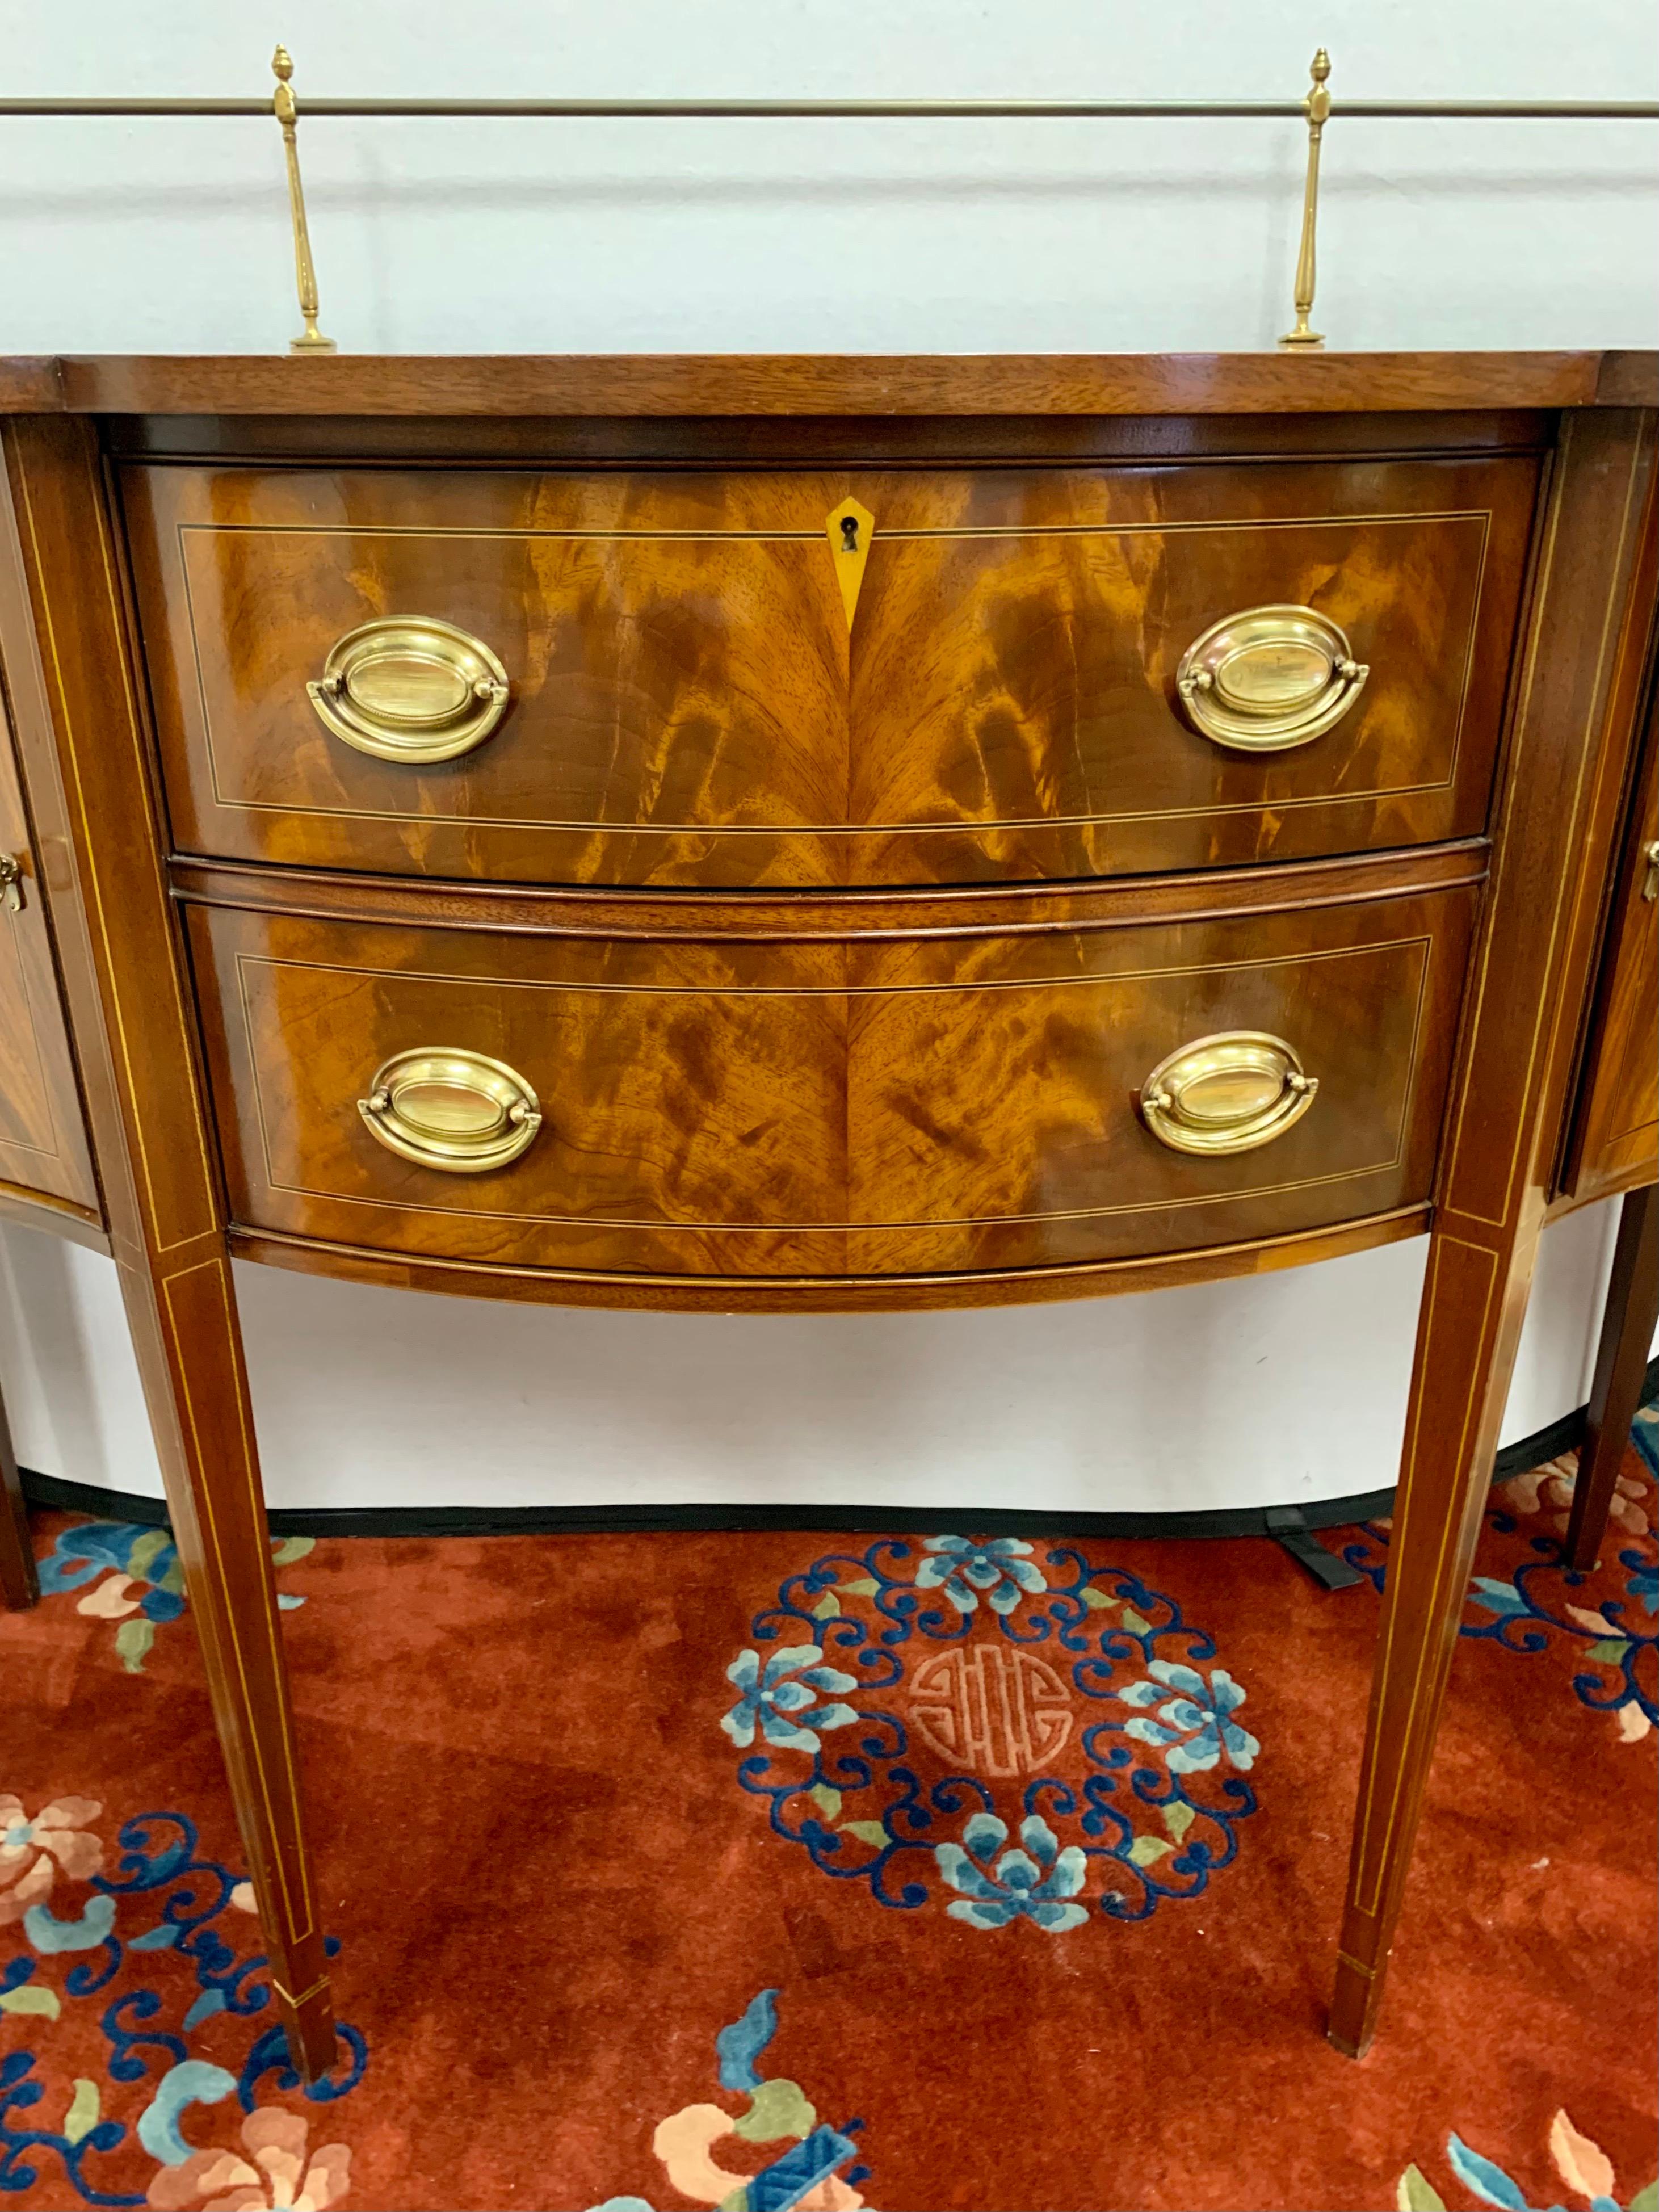 Elegant flame mahogany sideboard is beautifully appointed throughout and with practical storage space. The shaped front is a classic design feature and is highlighted with a brass gallery. It boasts two high quality center drawers flanked by outer